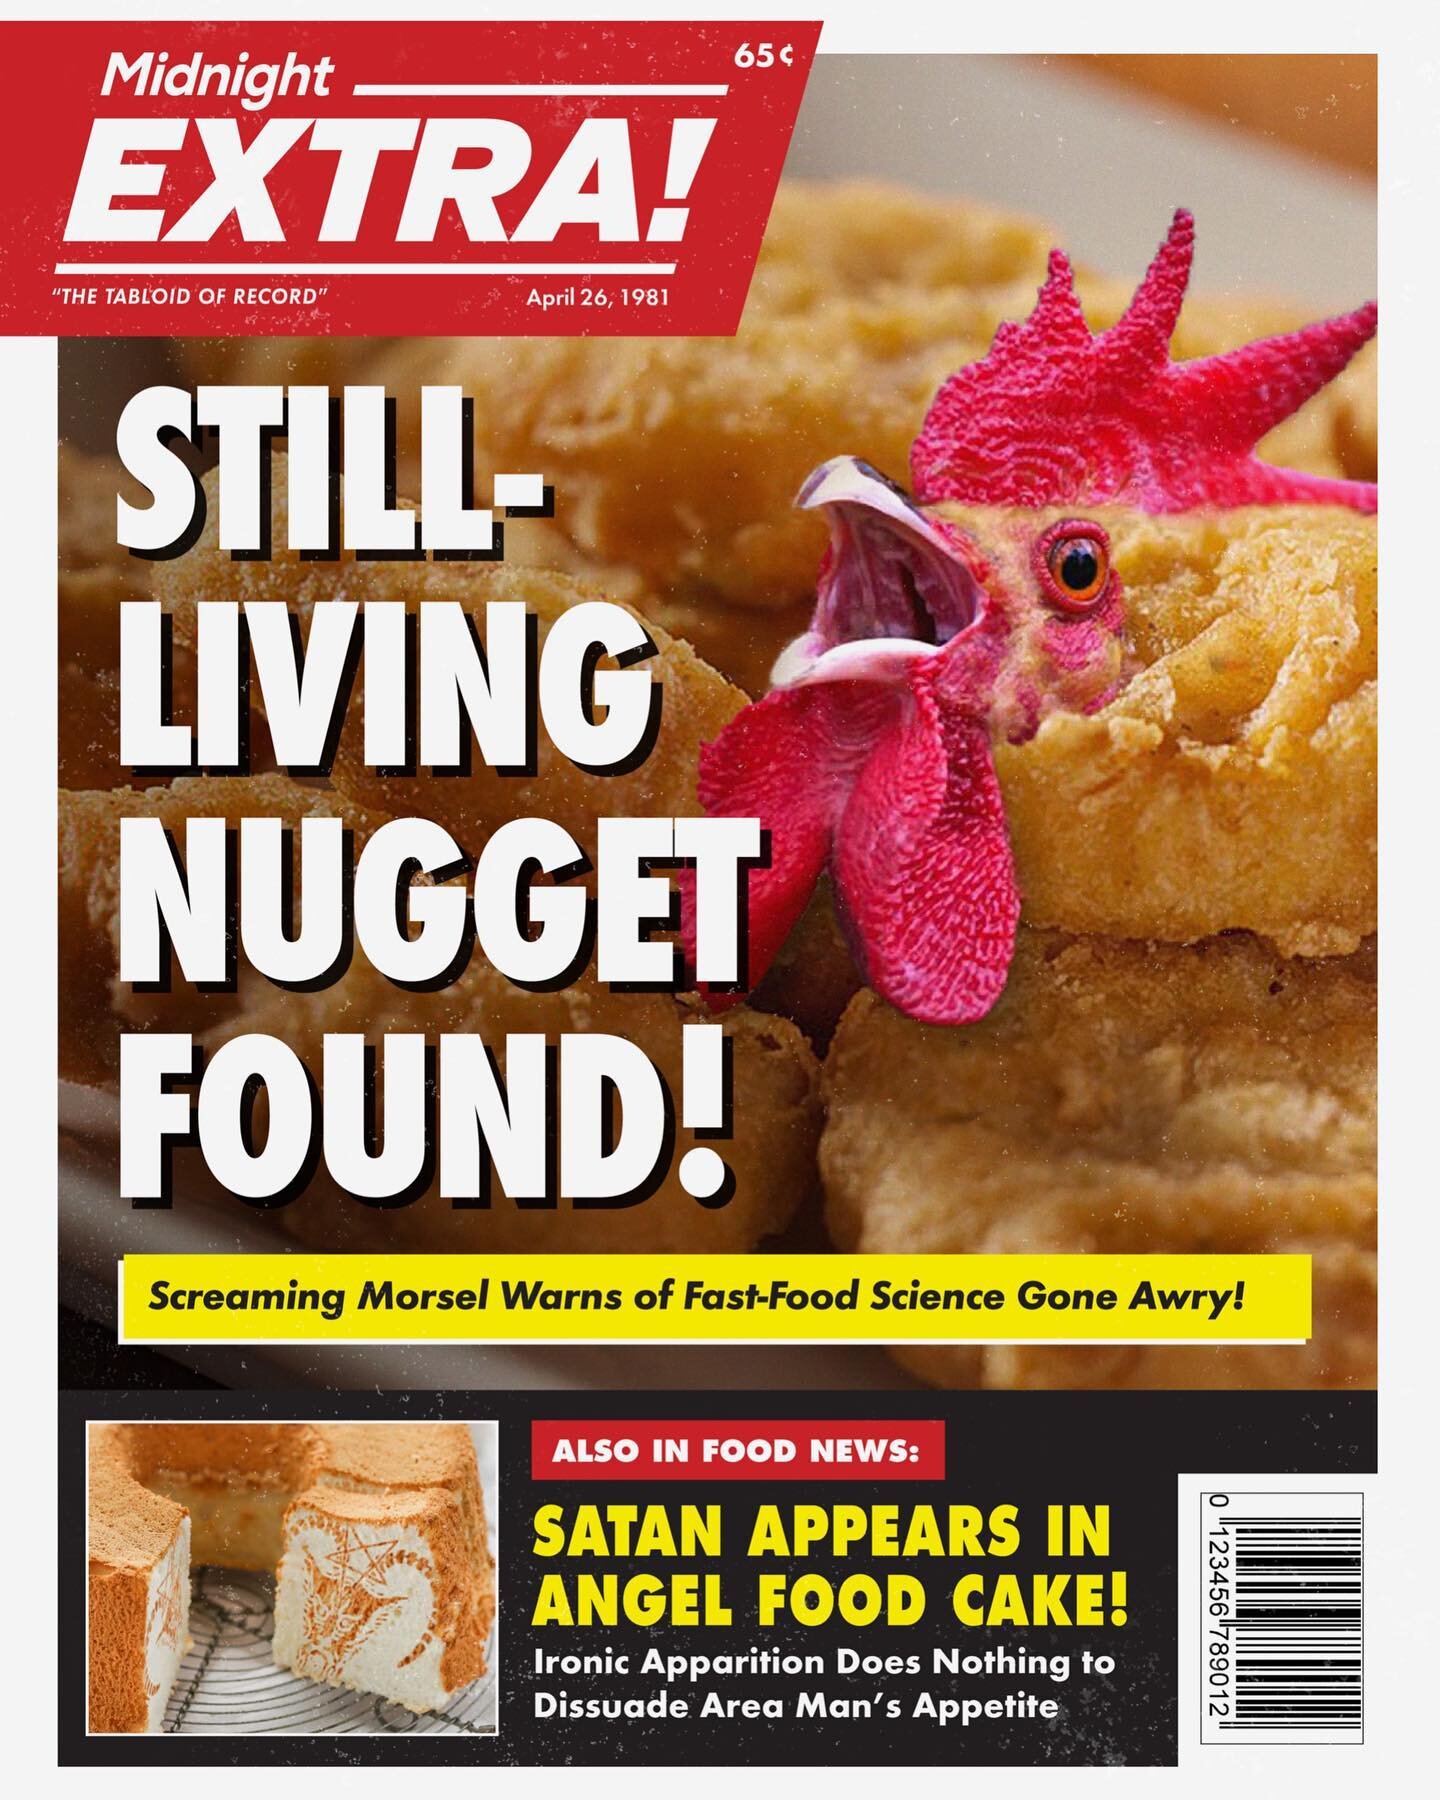 NUGGET NIGHTMARE from April,1981! Area man&rsquo;s fast-food dinner SPIRALED INTO MADNESS when he found a single chicken nugget STILL ALIVE in the box! The half-nugget SCREAMED A WARNING of GENETIC ENGINEERING and fast-food experiments GONE AWRY! Whe